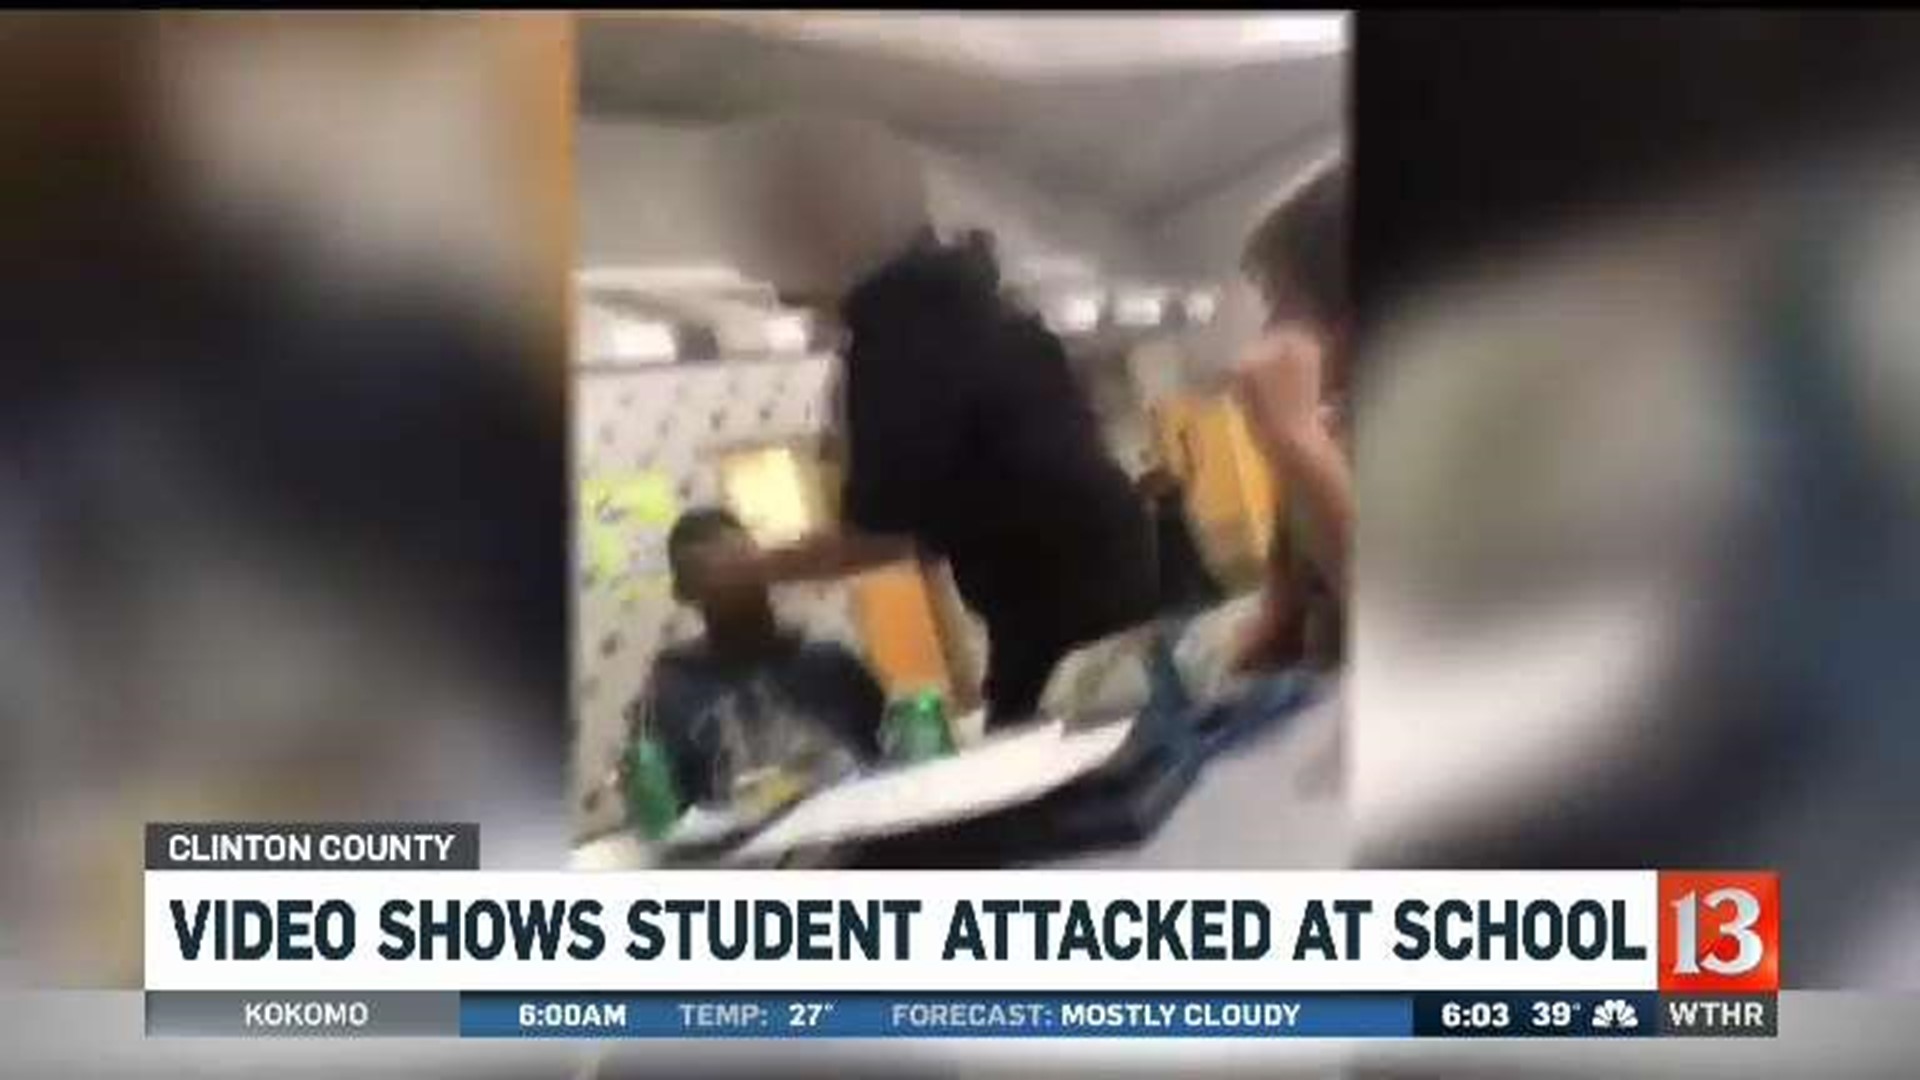 Video shows student attacked at school